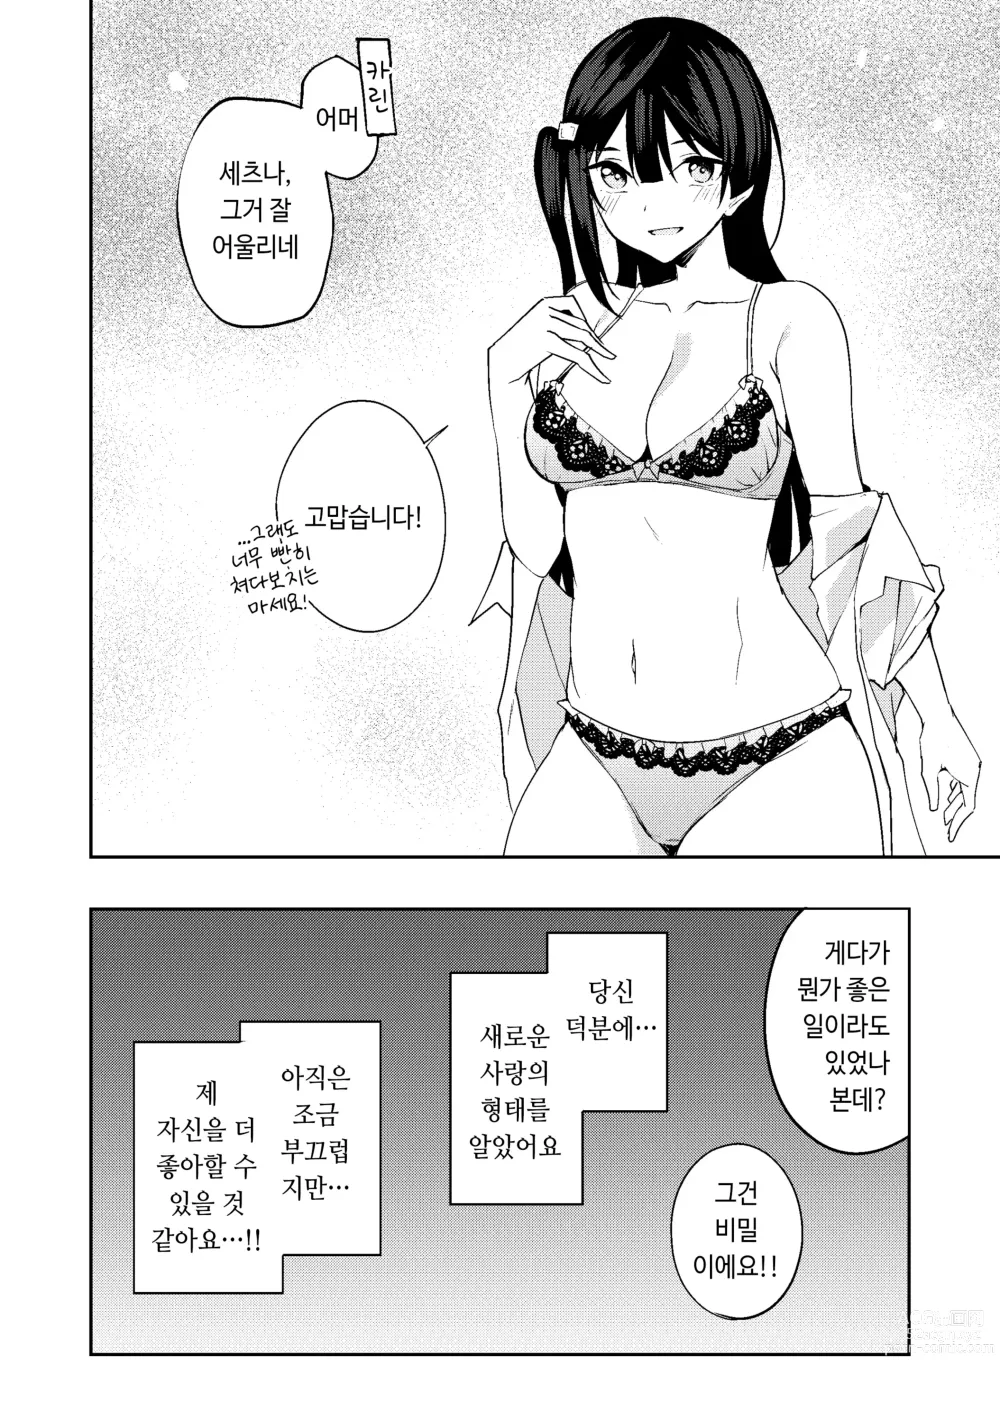 Page 19 of doujinshi Sunny Scarlet